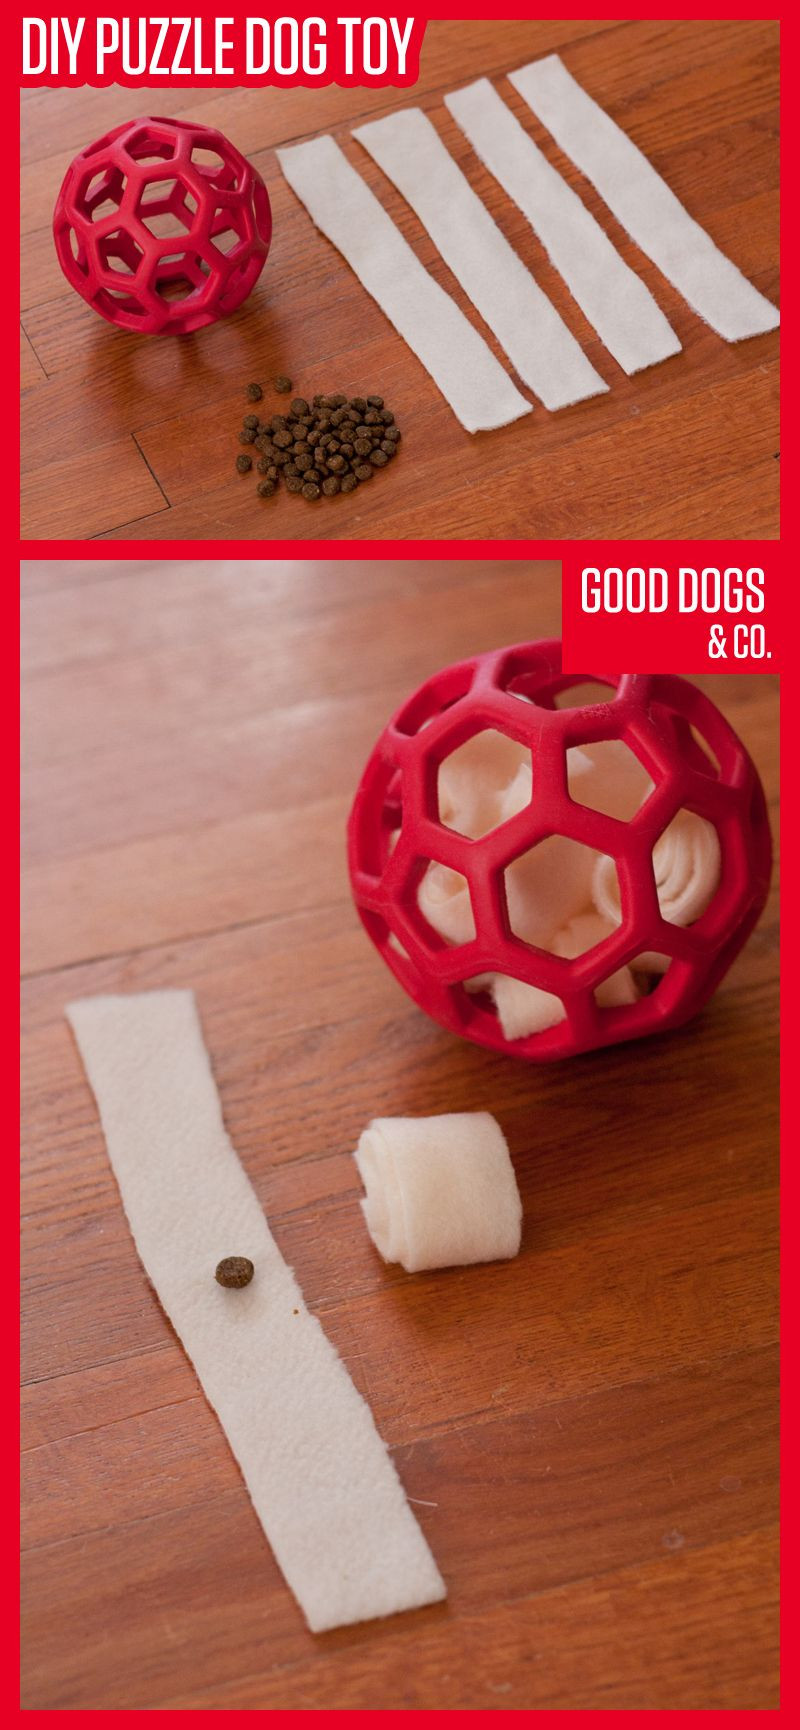 DIY Dog Puzzles
 How To DIY A Puzzle Dog Toy With Two Simple Materials